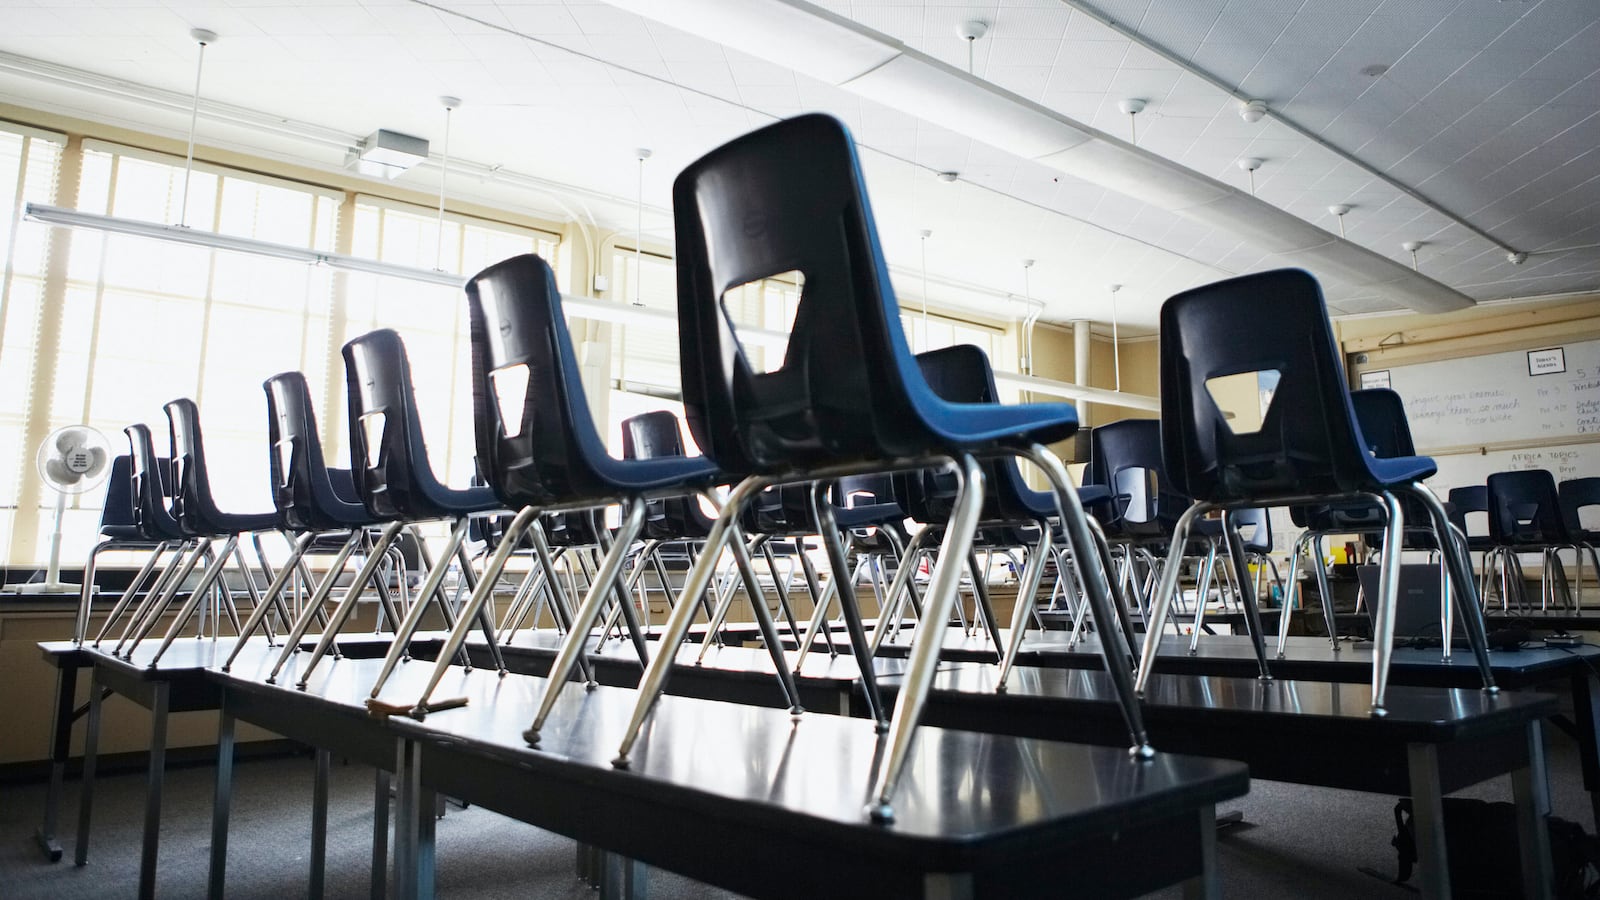 Tennessee schools are closed through at least April 24 under a directive of Gov. Bill Lee. Emergency rules approved by the State Board of Education on Thursday cover immediate concerns caused by COVID-19 for the 2019-20 school year.